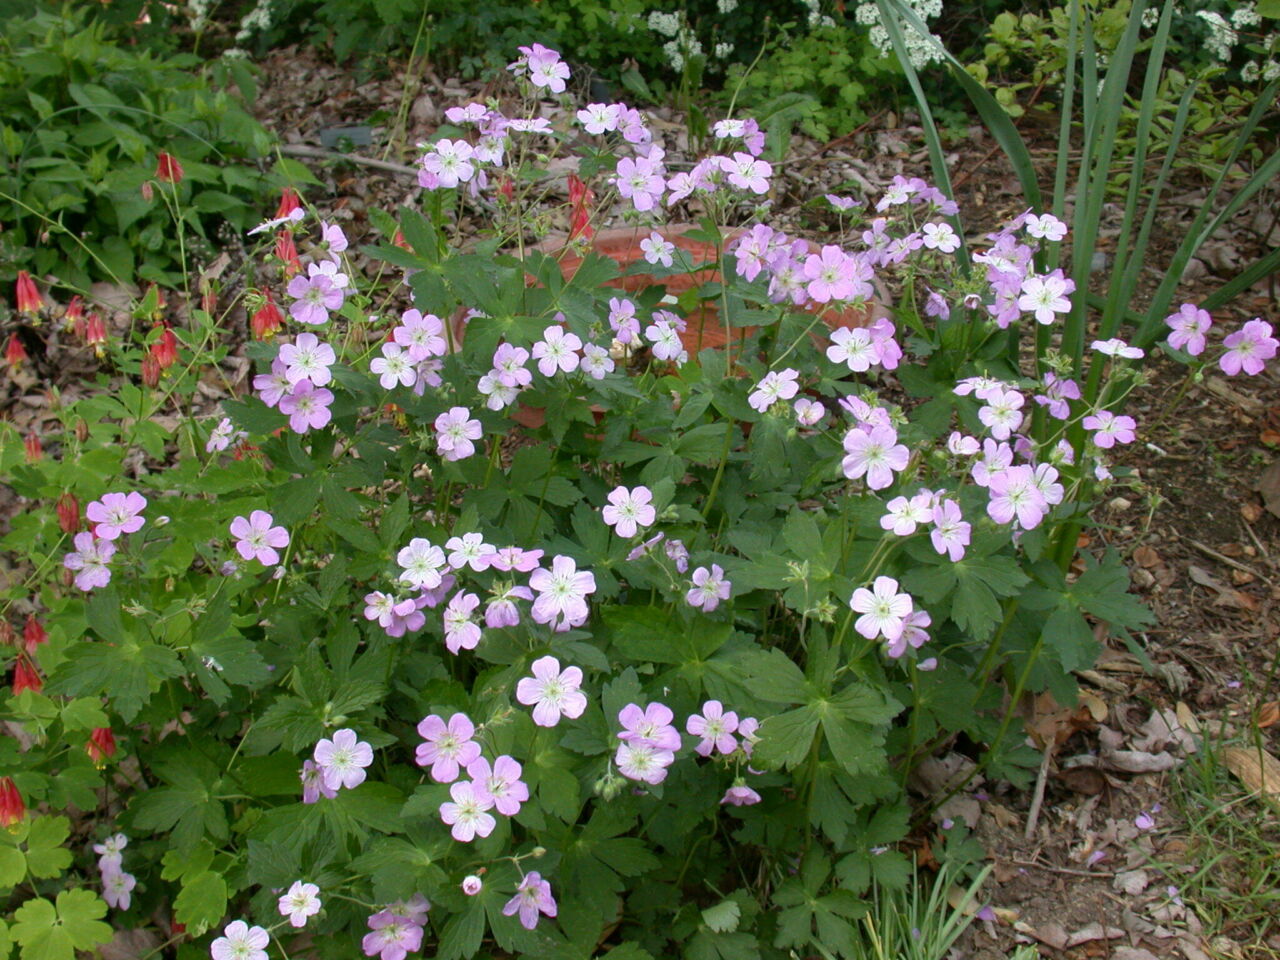 Native geranium with small pink blooms